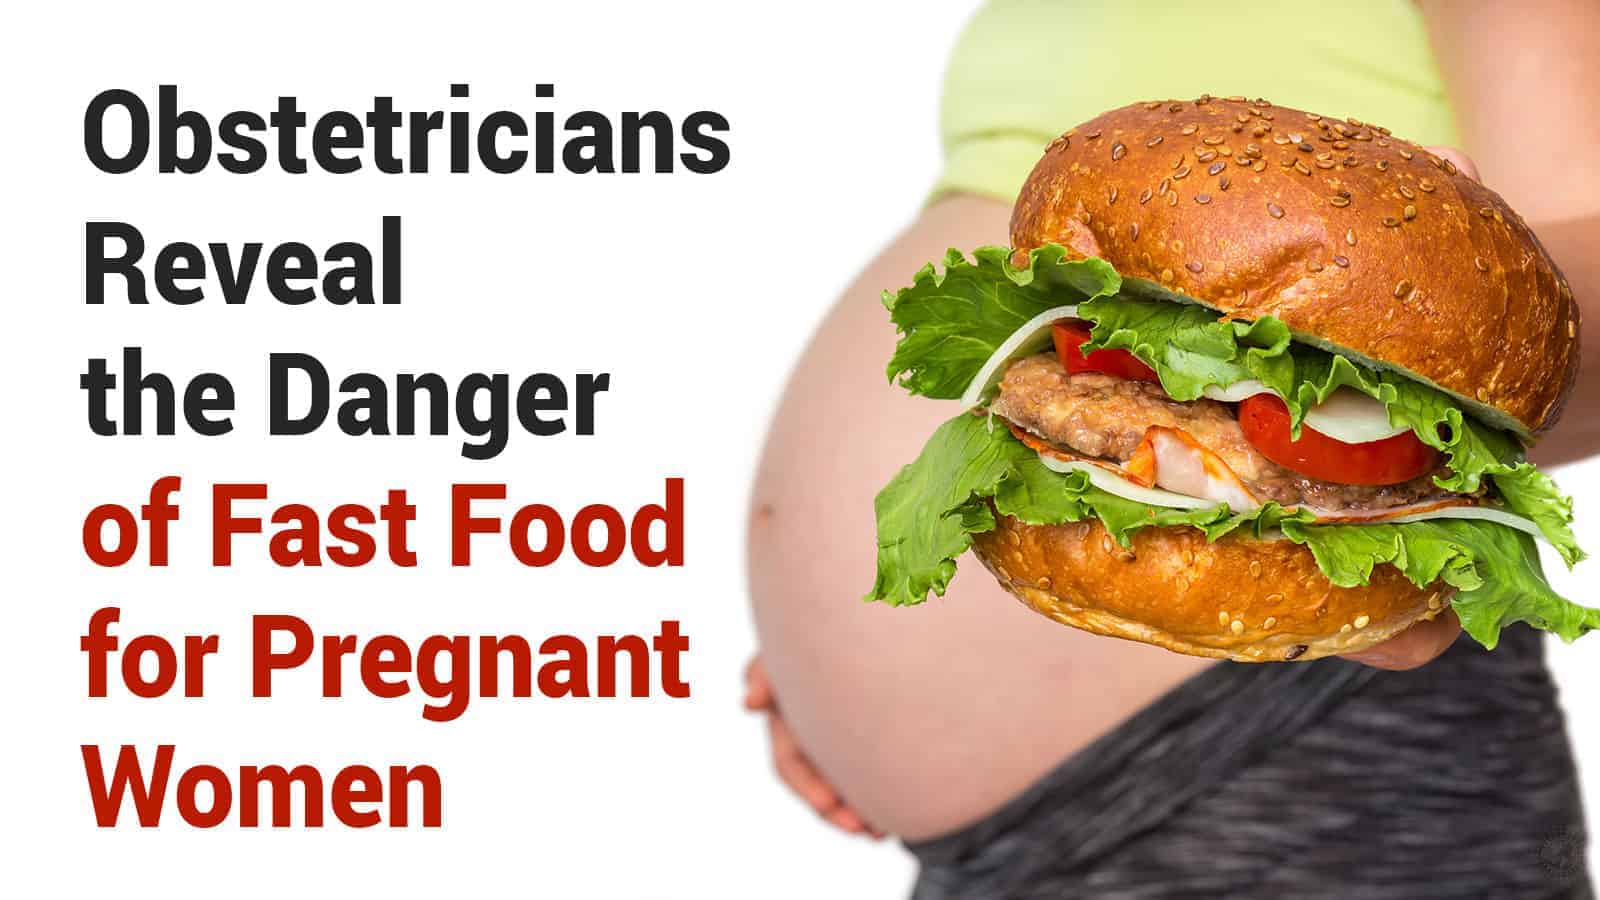 Obstetricians Reveal the Danger of Fast Food for Pregnant Women